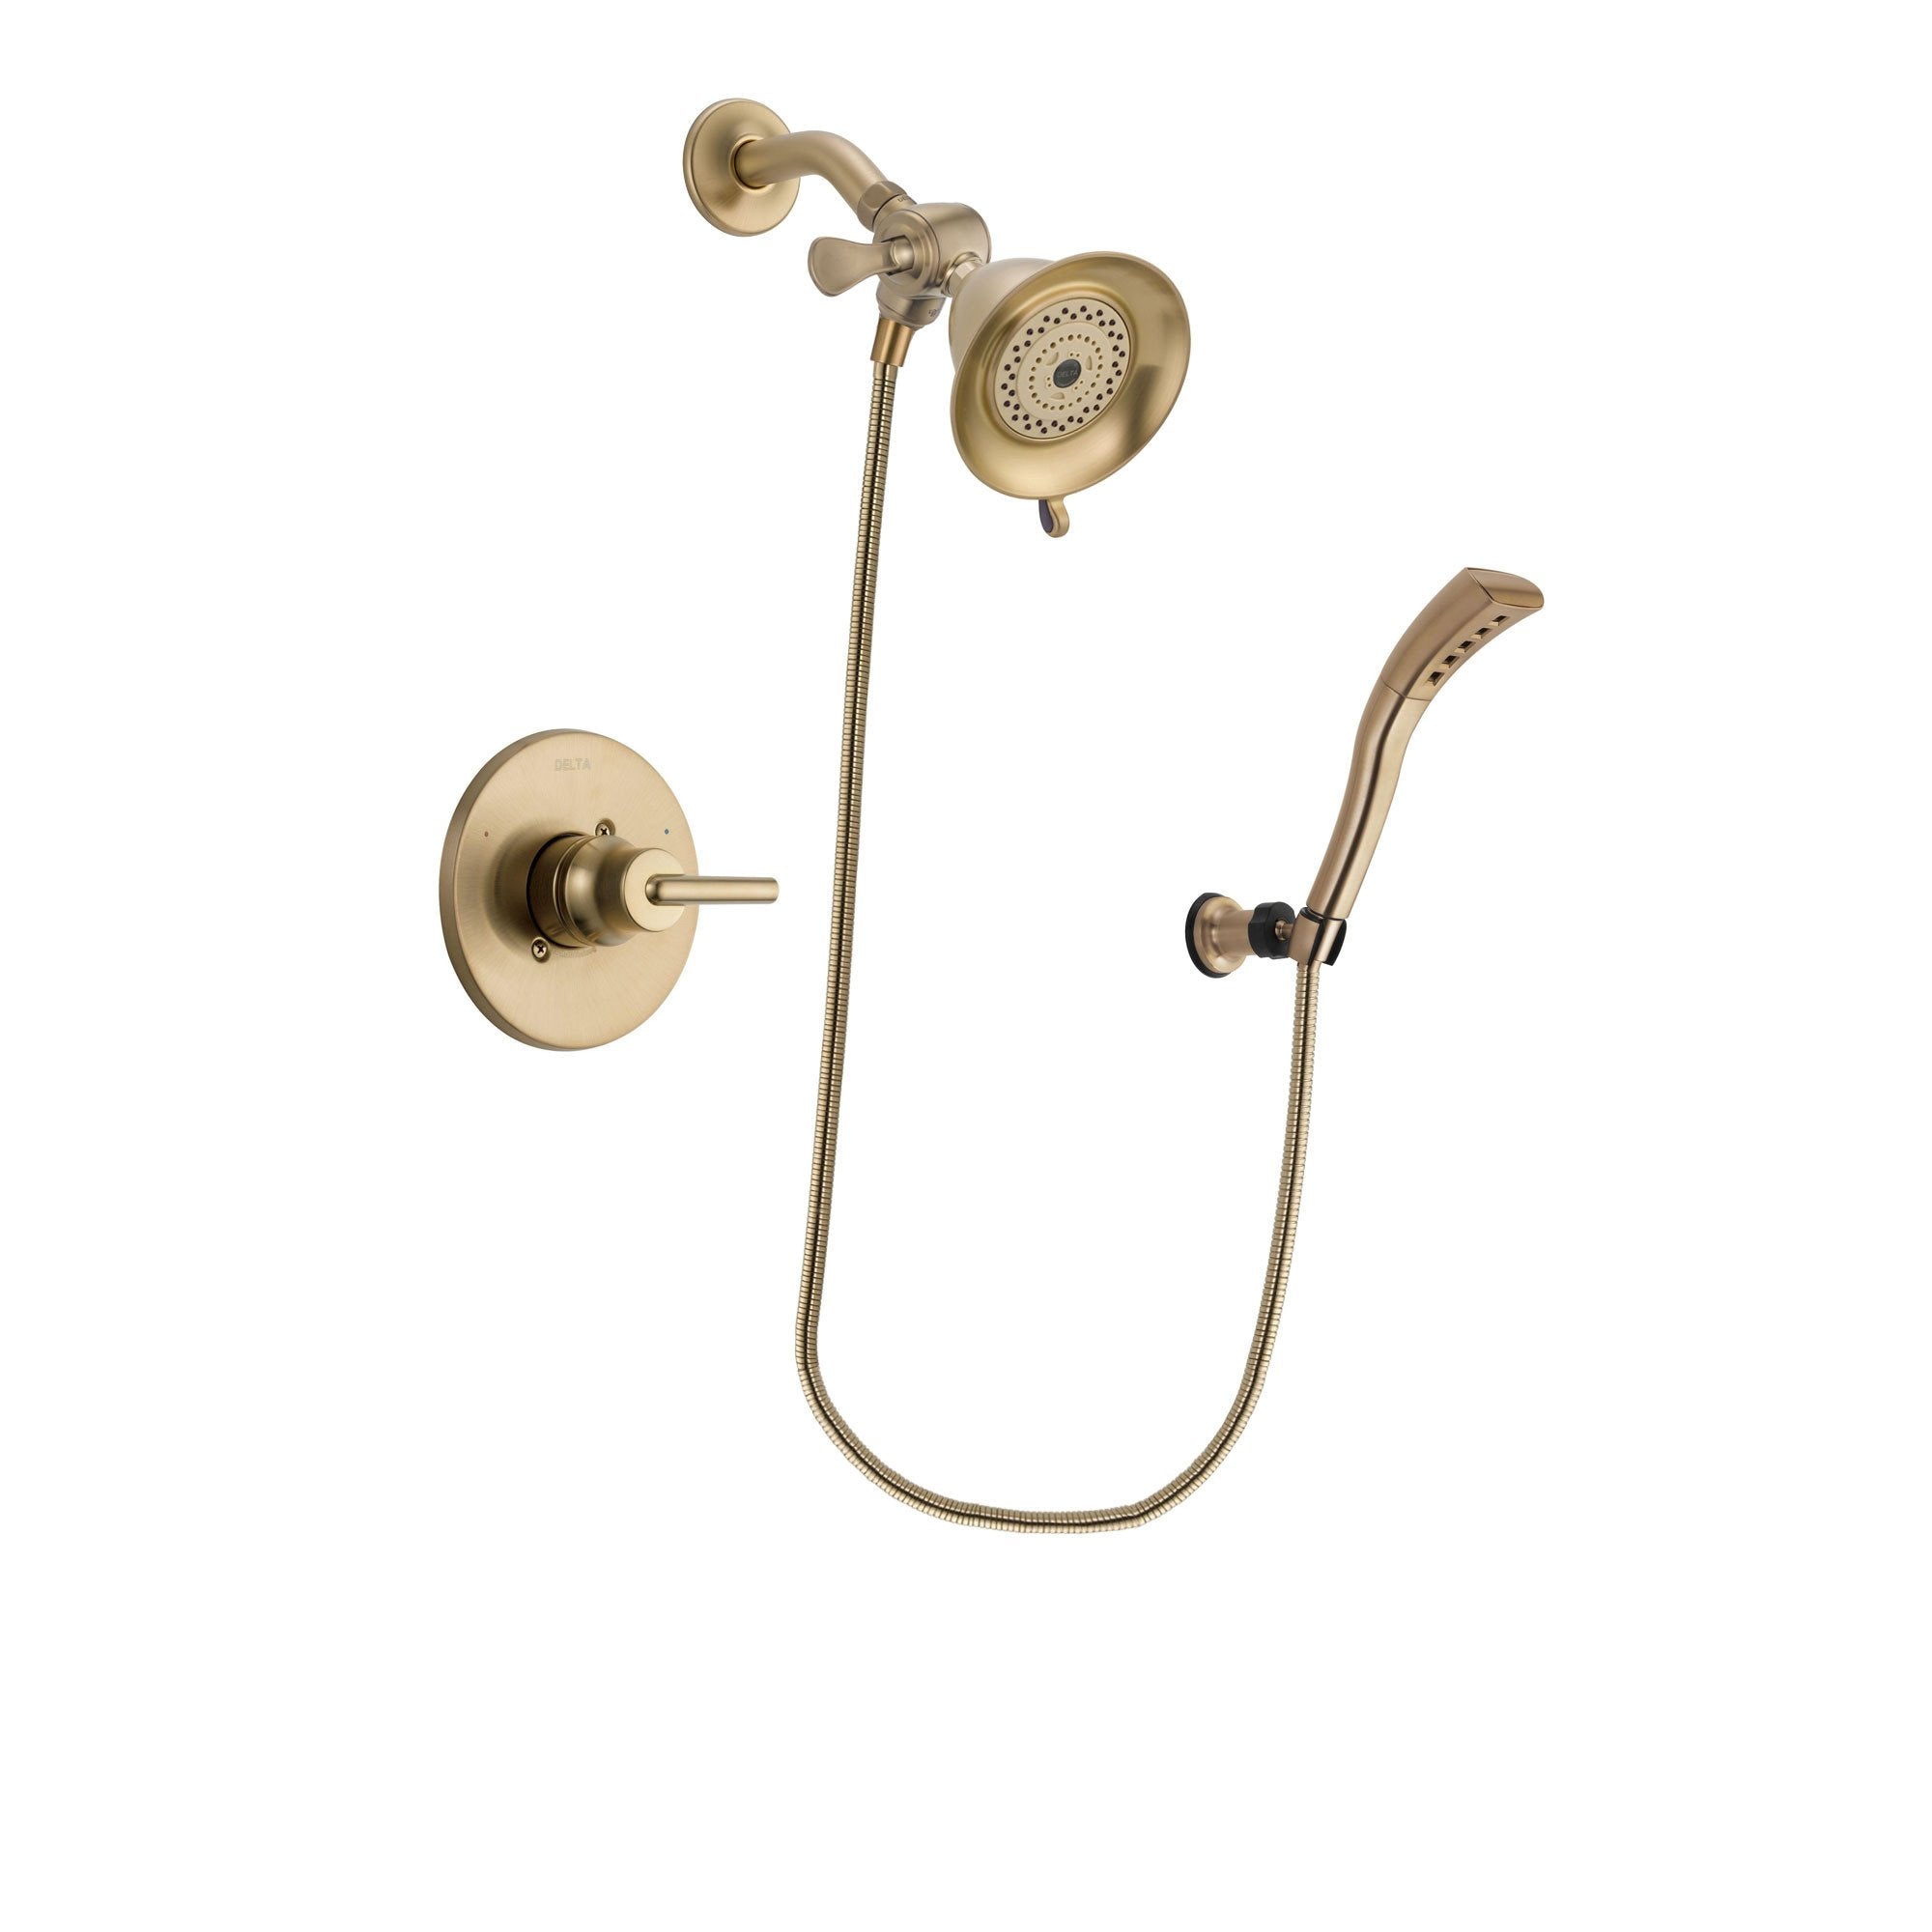 Delta Trinsic Champagne Bronze Finish Shower Faucet System Package with Water-Efficient Shower Head and Modern Wall Mount Personal Handheld Shower Spray Includes Rough-in Valve DSP3640V